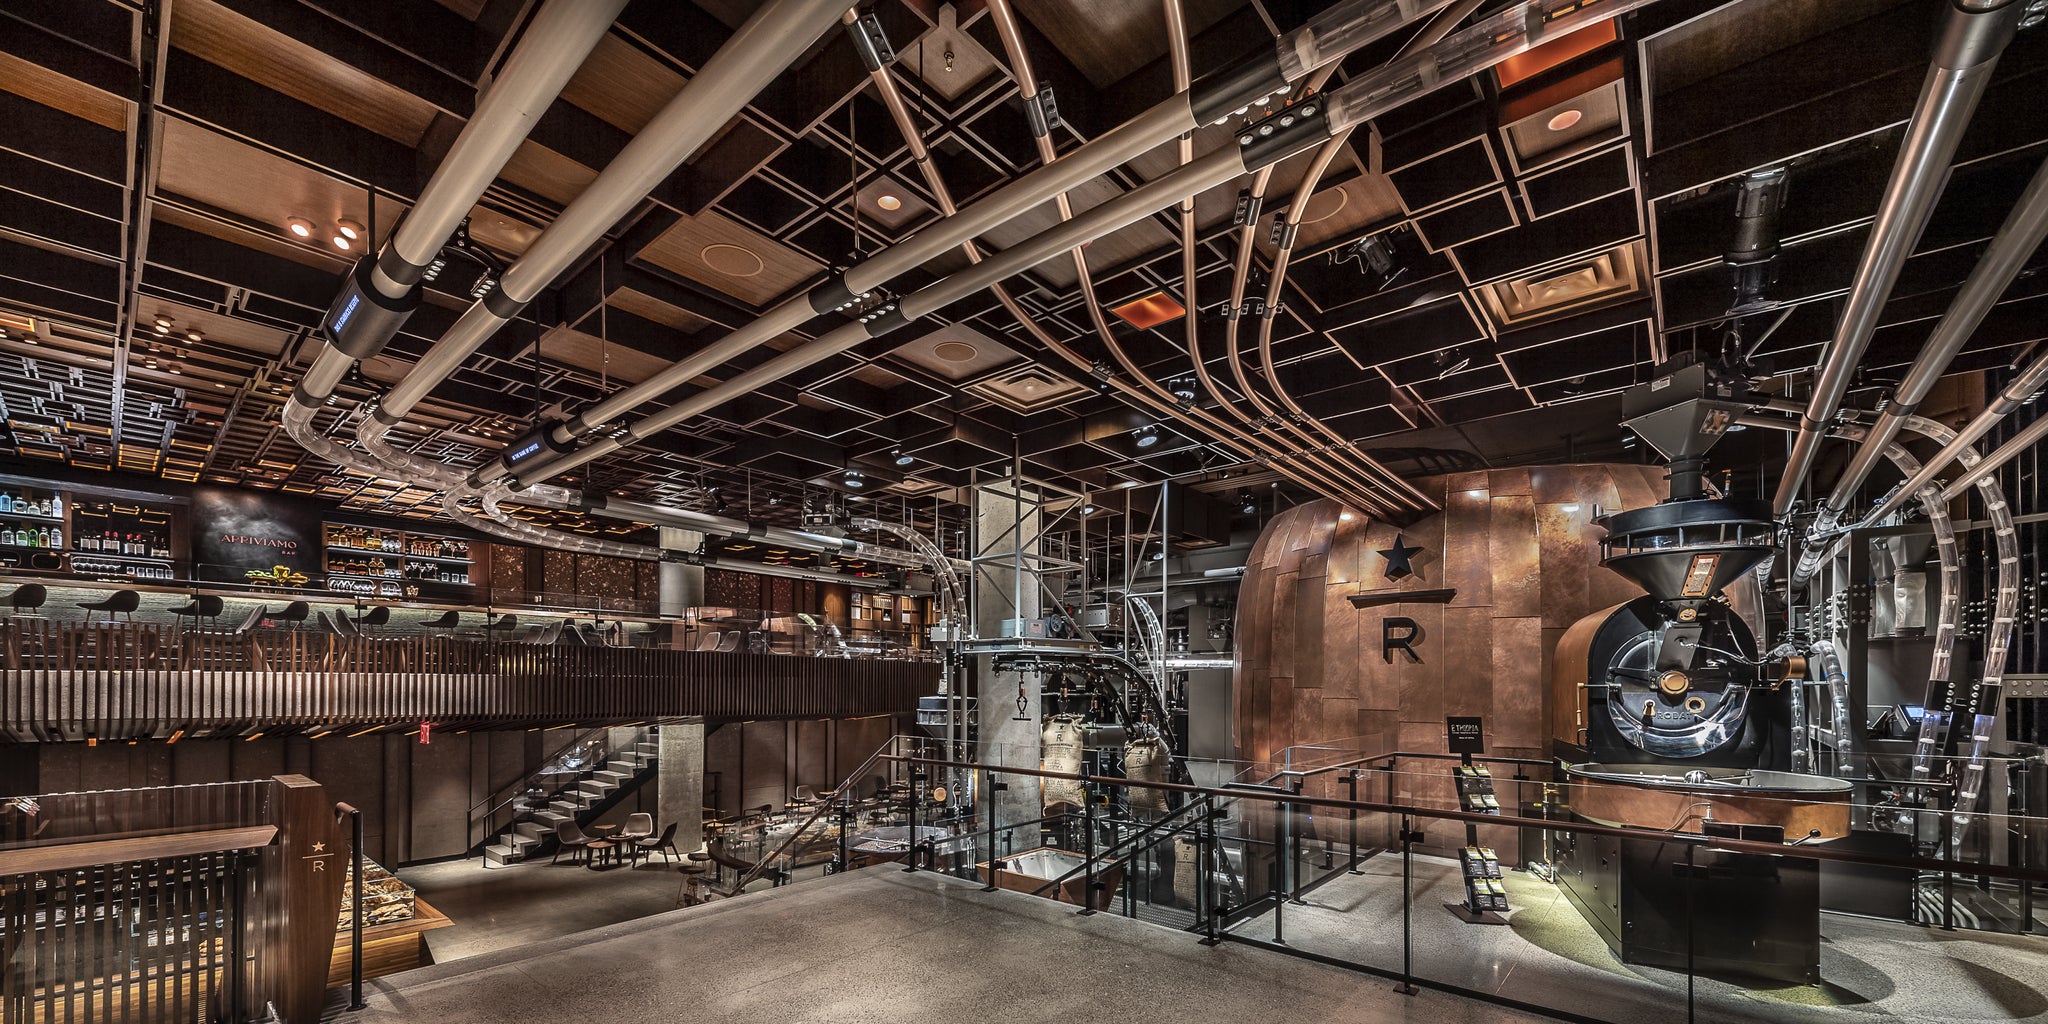 This New Starbucks Is a 23,000-Square-Foot Coffee Shrine With a Full ...